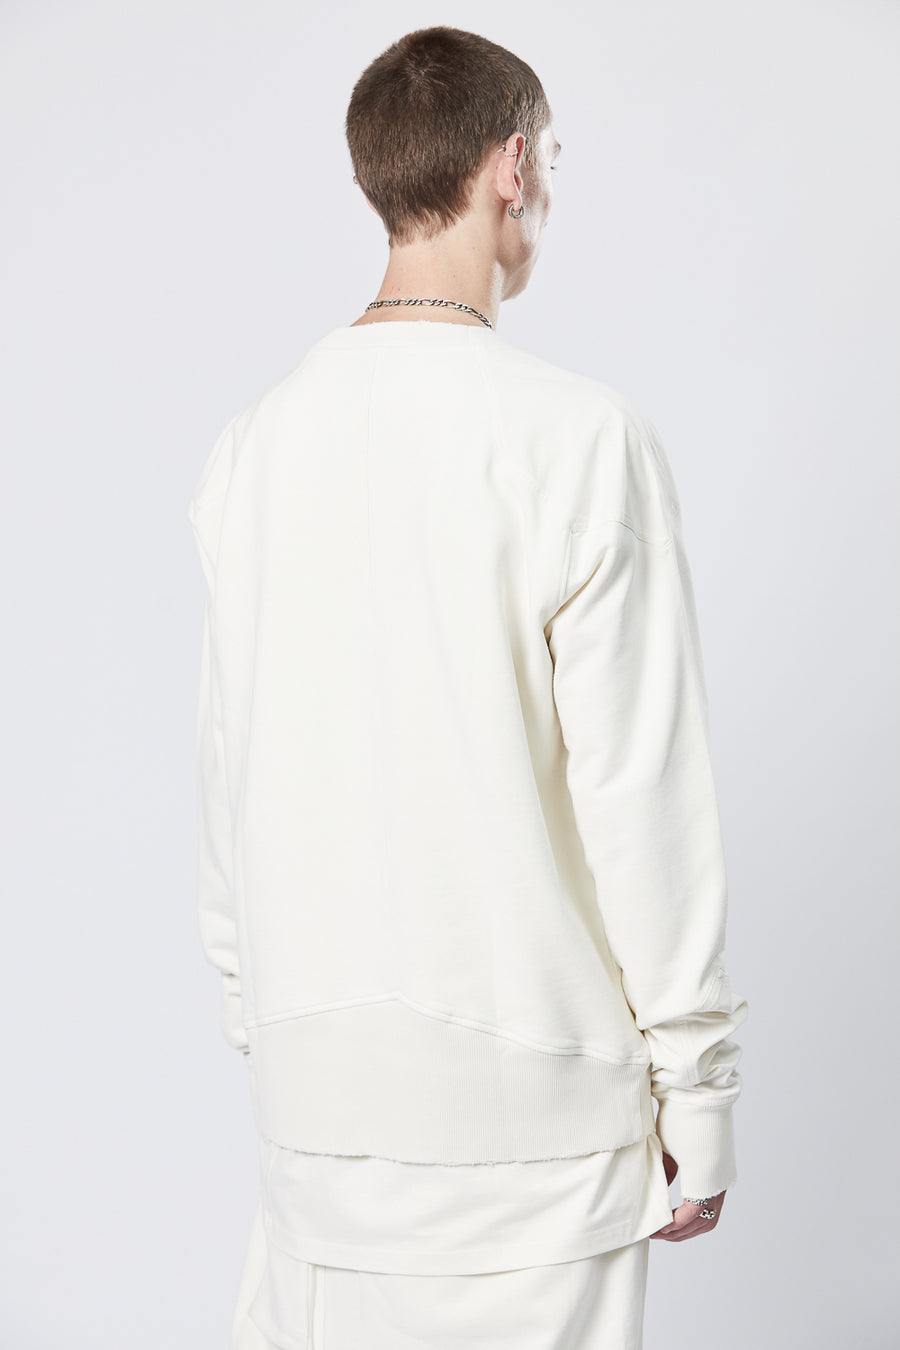 Buy the Thom Krom M S 170 Sweatshirt in Cream at Intro. Spend £50 for free UK delivery. Official stockists. We ship worldwide.